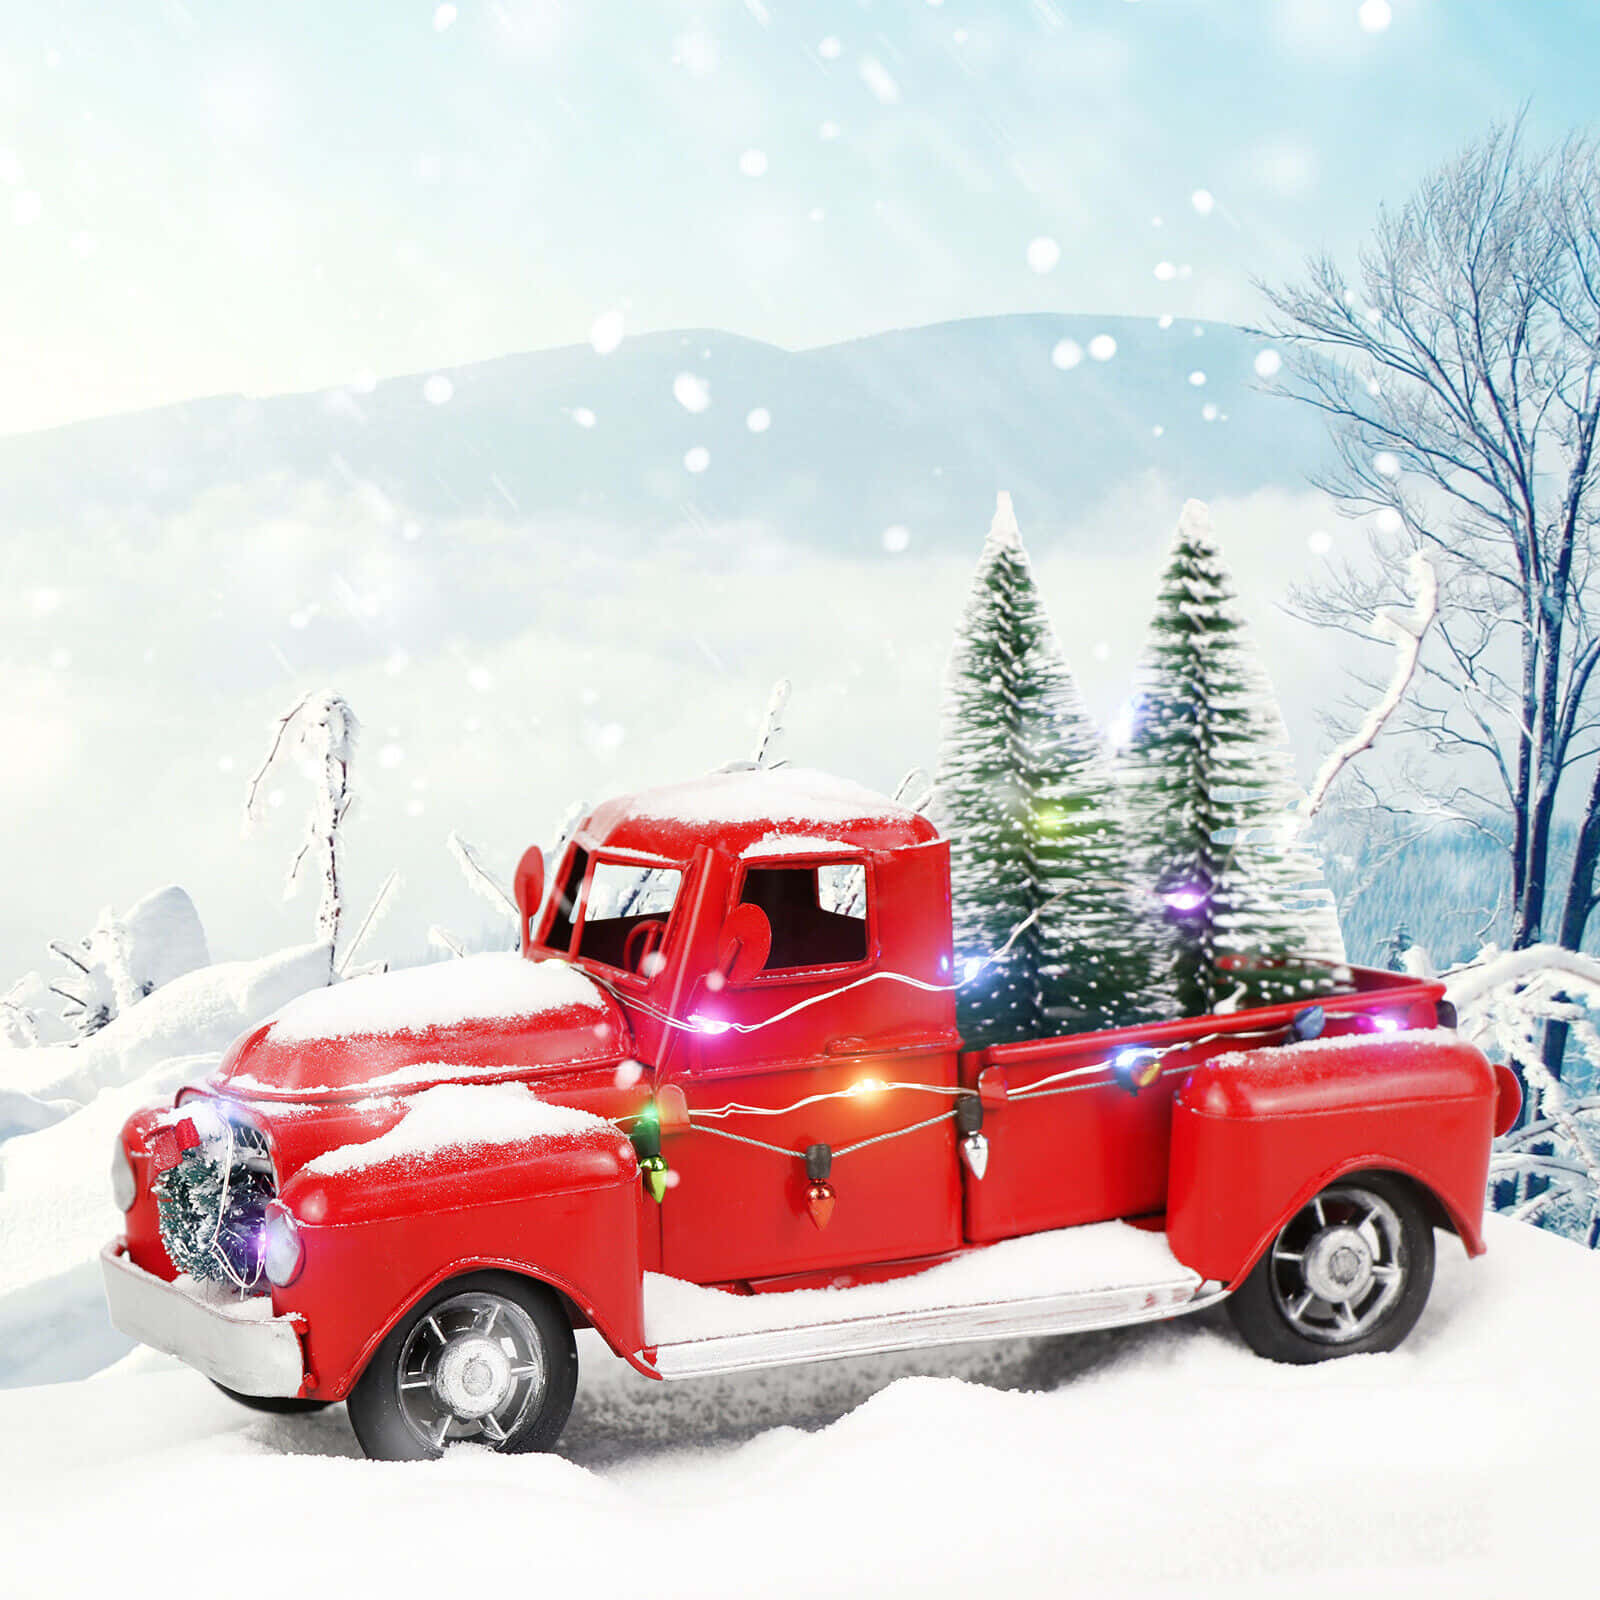 Get festive with this vintage pickup truck wrapped in Christmas lights Wallpaper